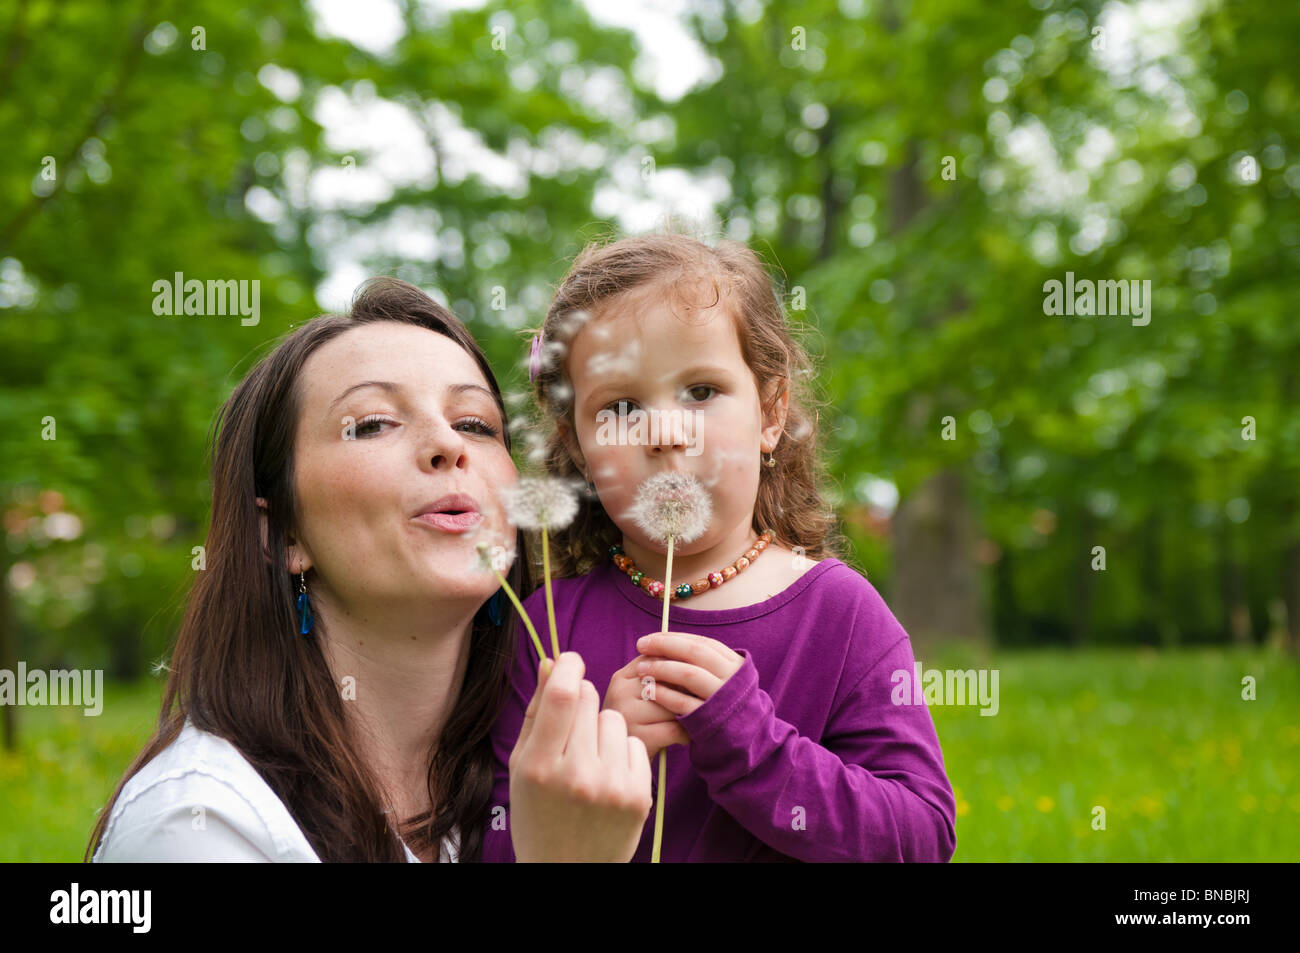 Mother with small daughter blowing to dandelion - lifestyle outdoors scene in park Stock Photo